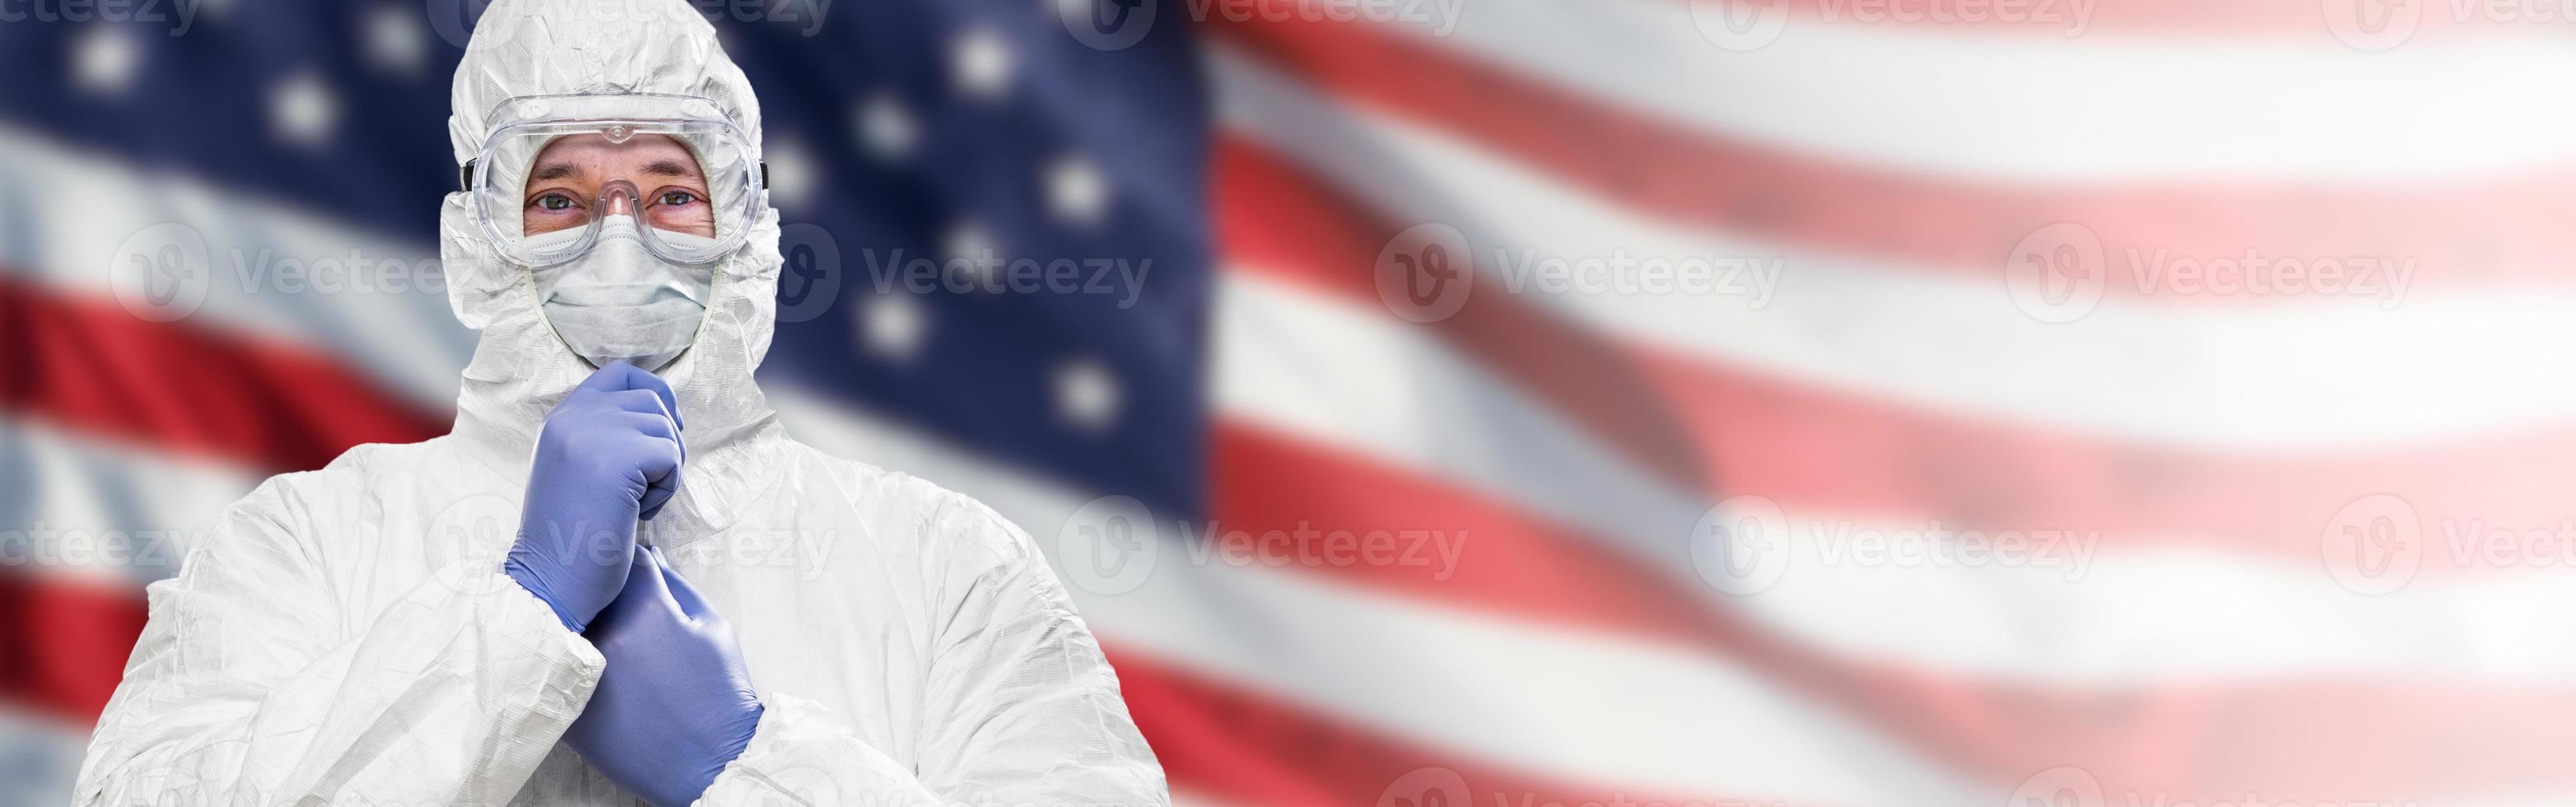 Doctor or Nurse Wearing Medical Personal Protective Equipment Against The American Flag Banner photo